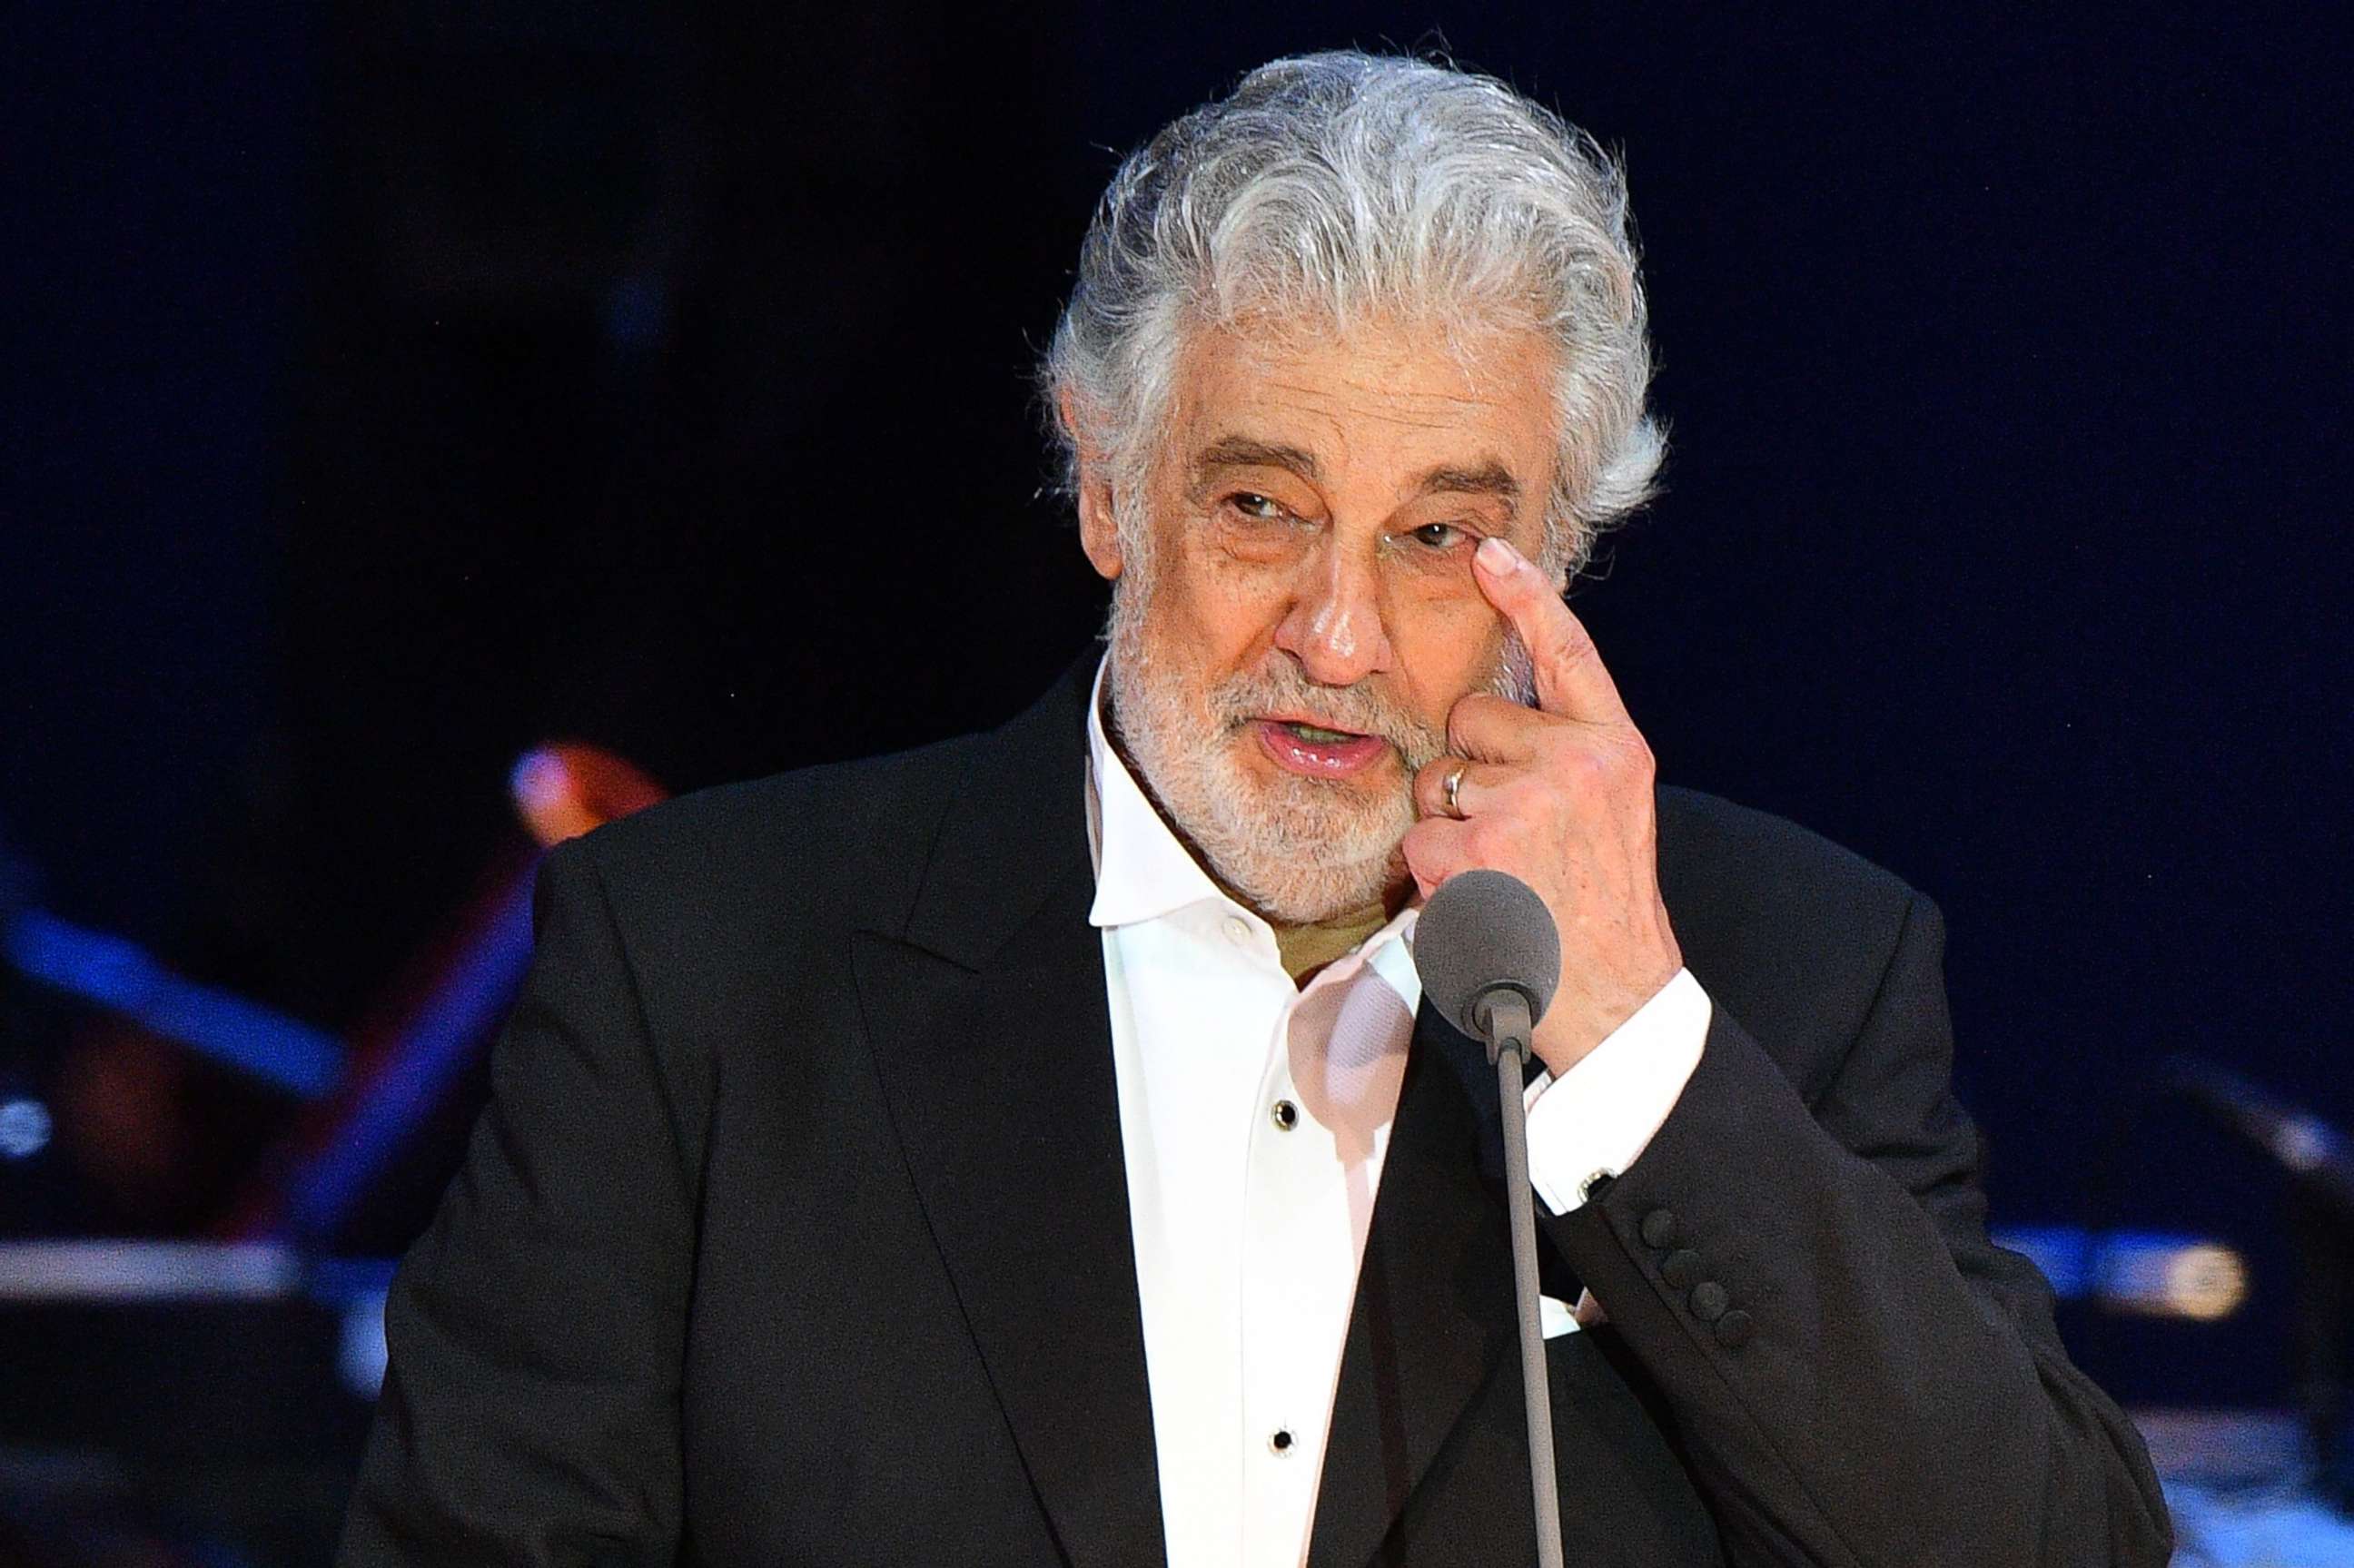 PHOTO: Spanish tenor Placido Domingo gestures as he performs during a concert in Szeged, Hungary, Aug. 28, 2019.